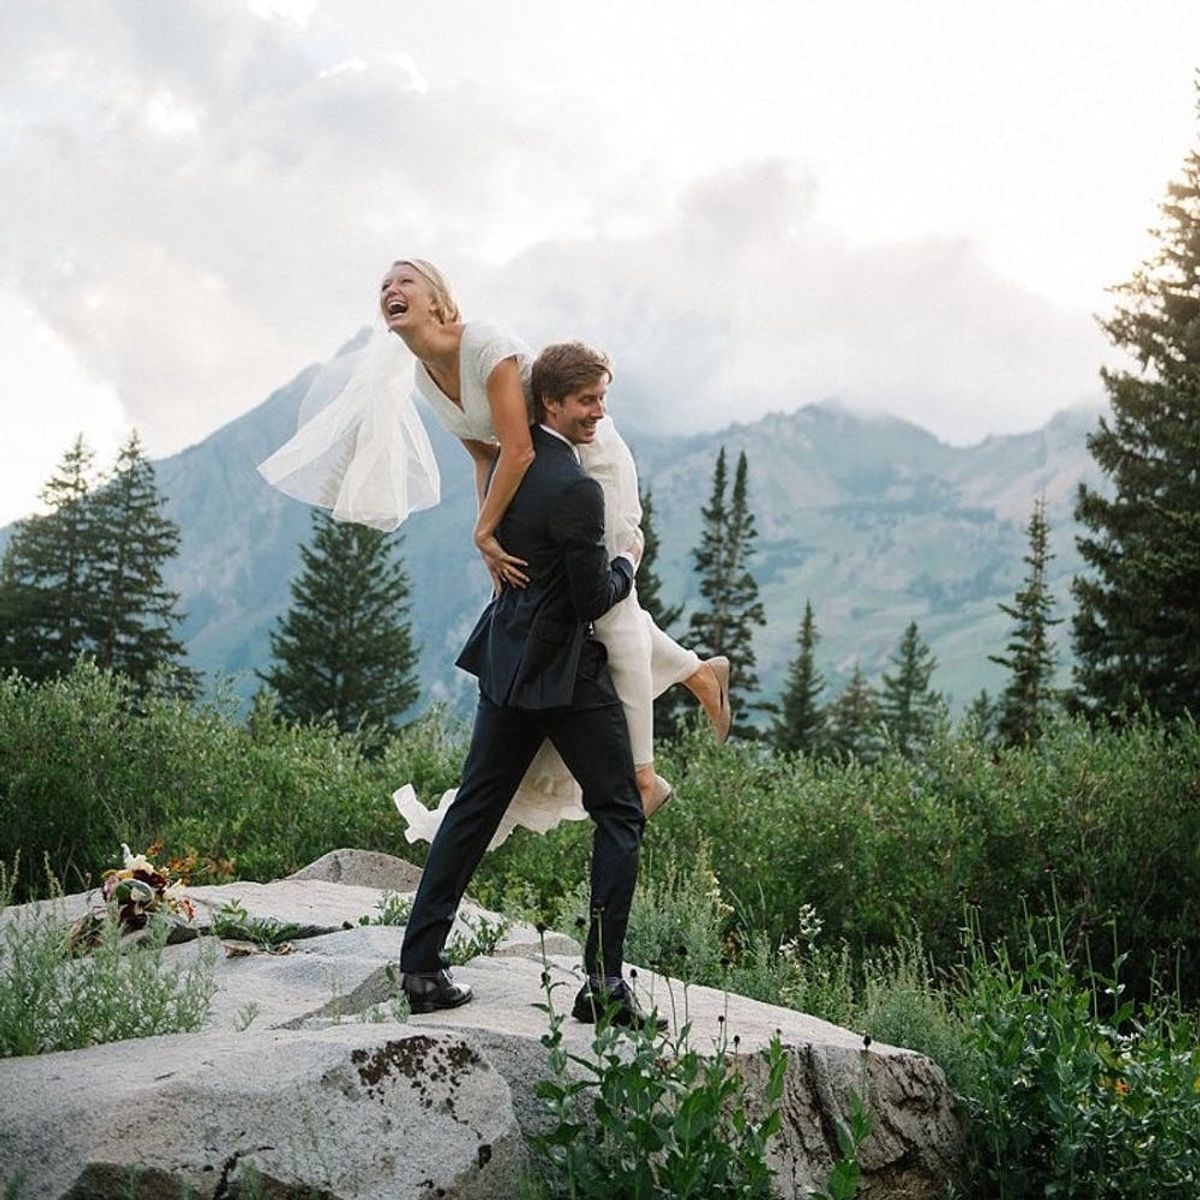 21 Images That Will Inspire Your Mountain Wedding